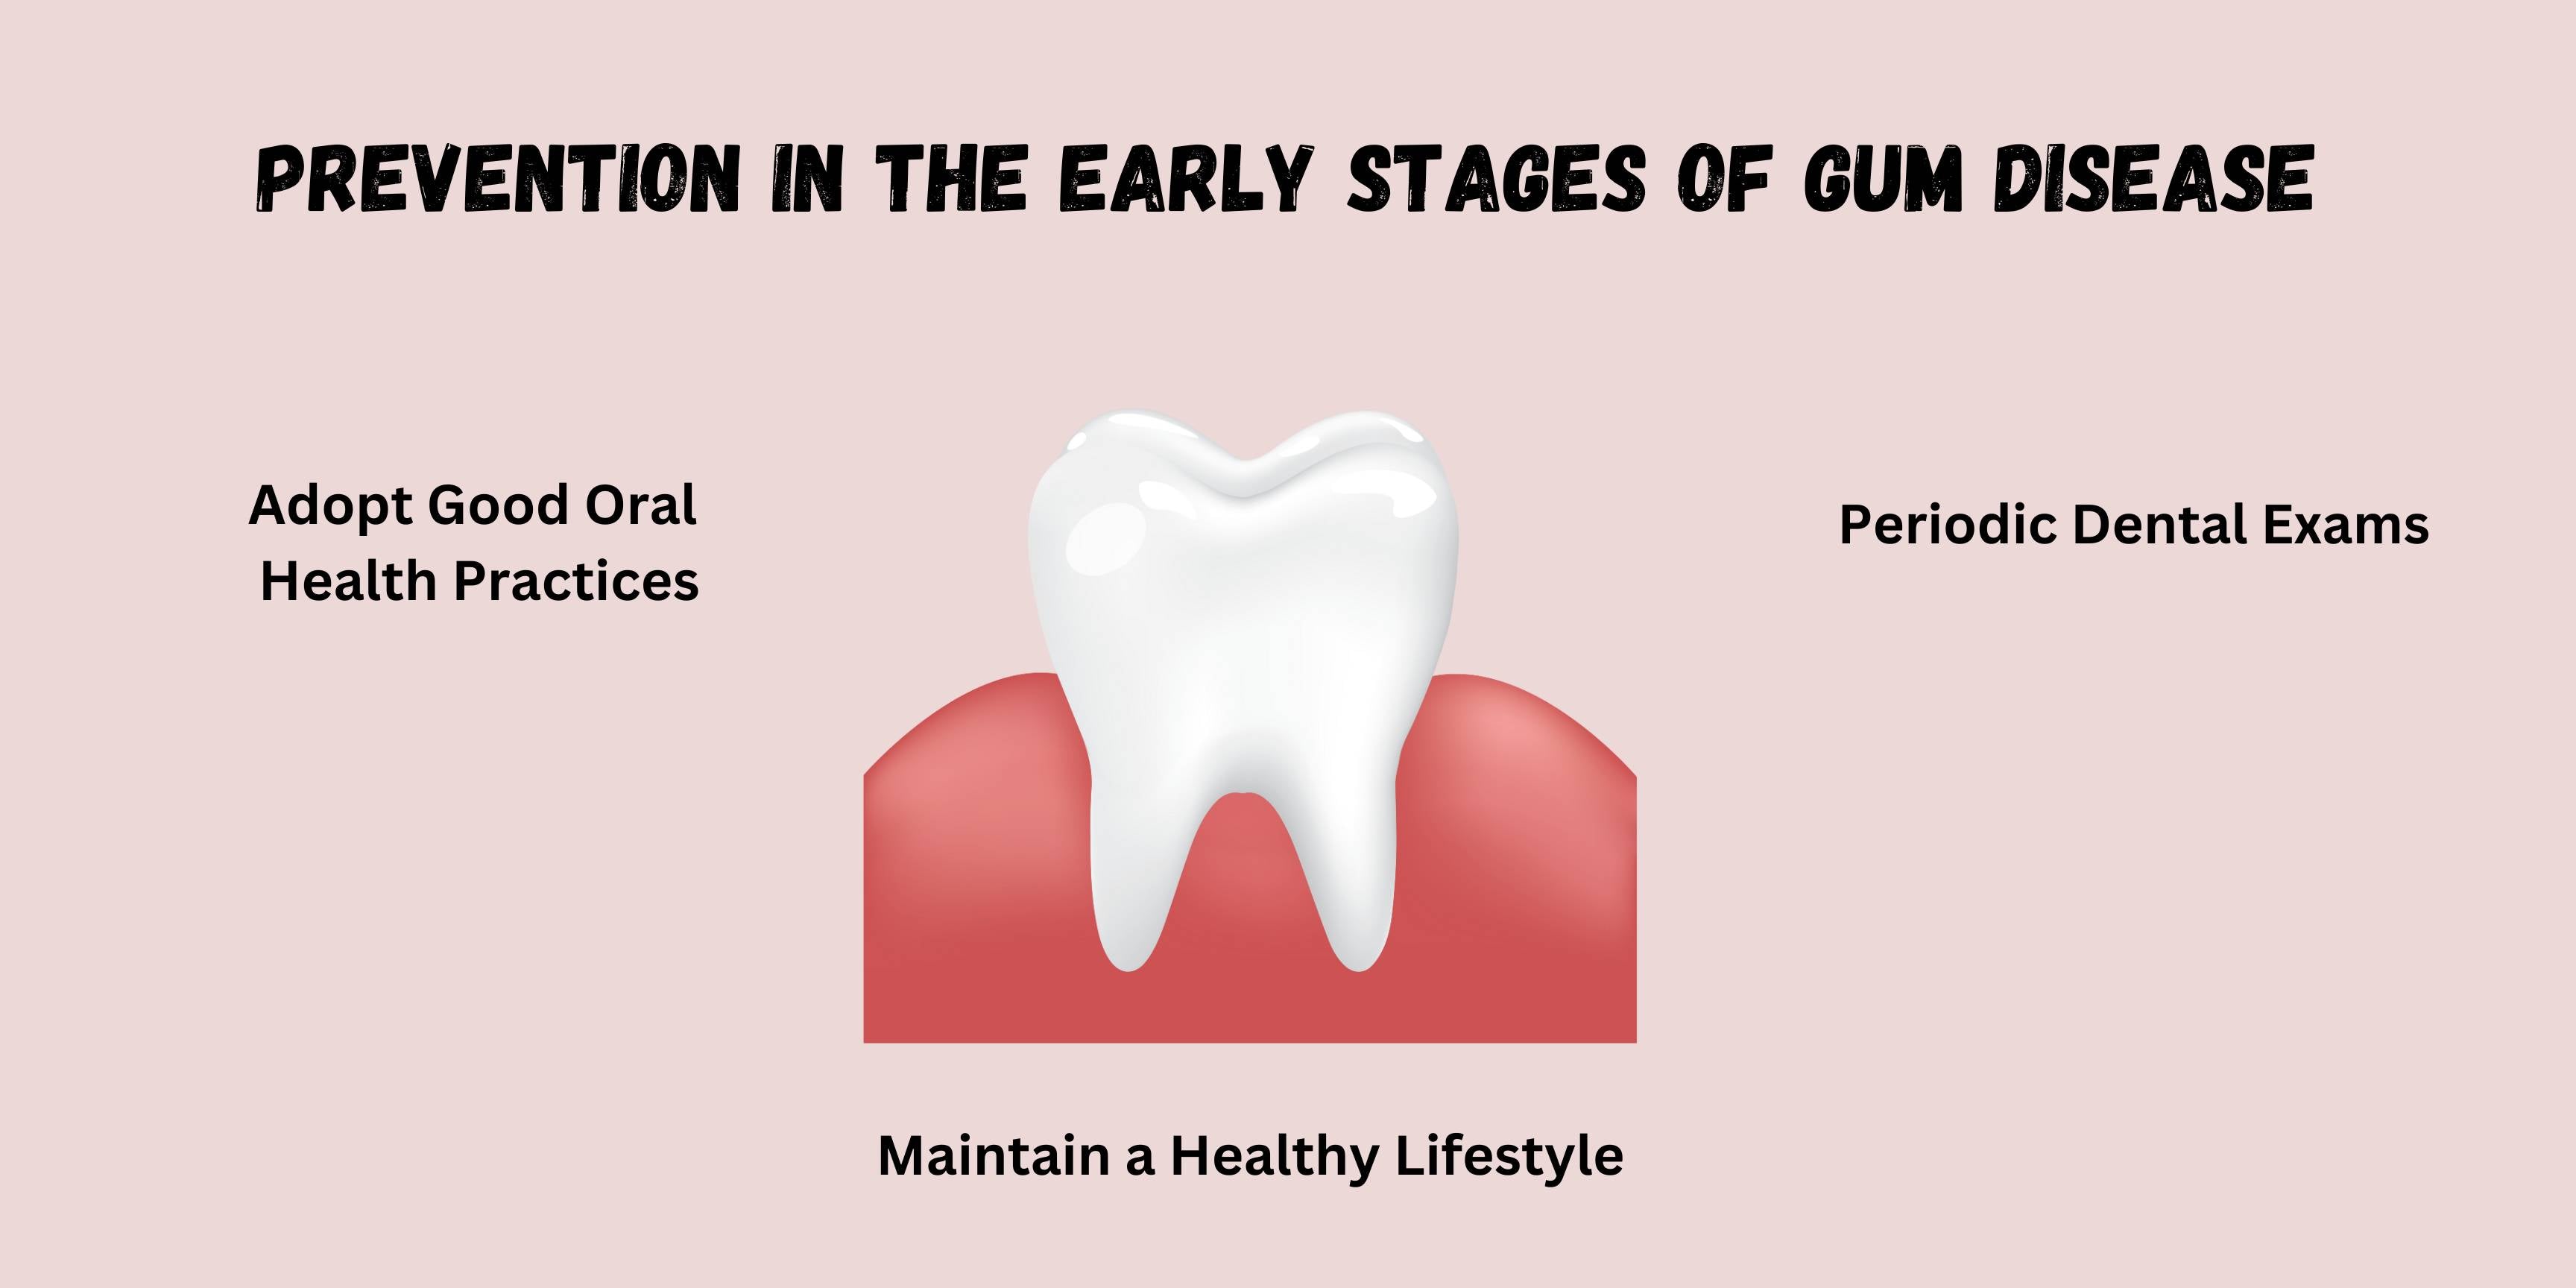 Prevention in the early stages of gum disease